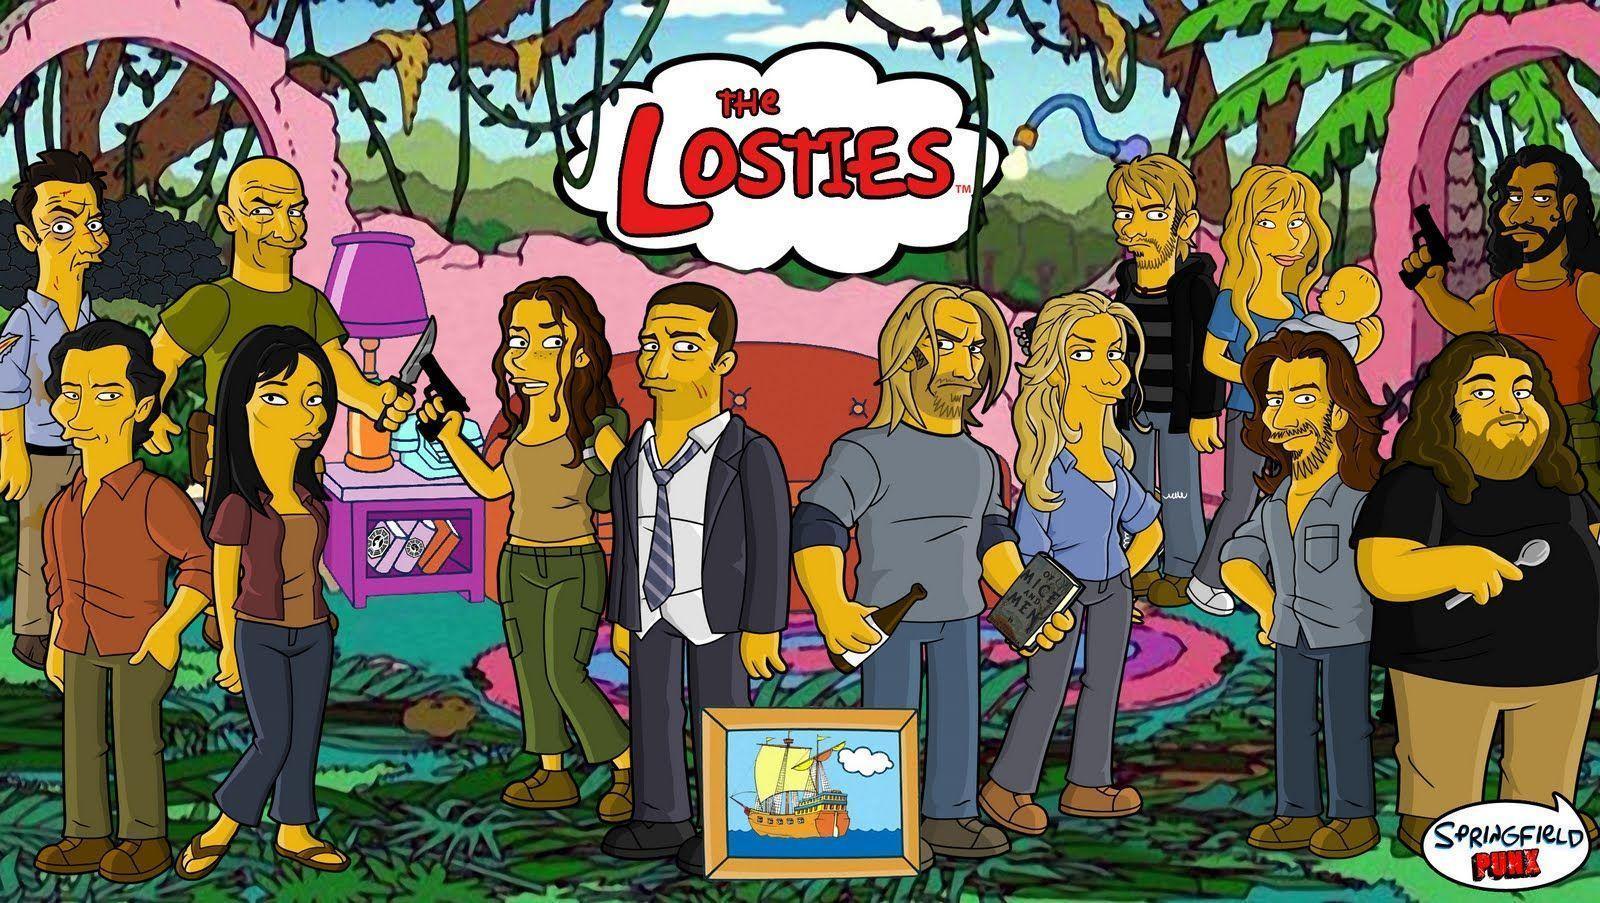 Lost, Simpsons style